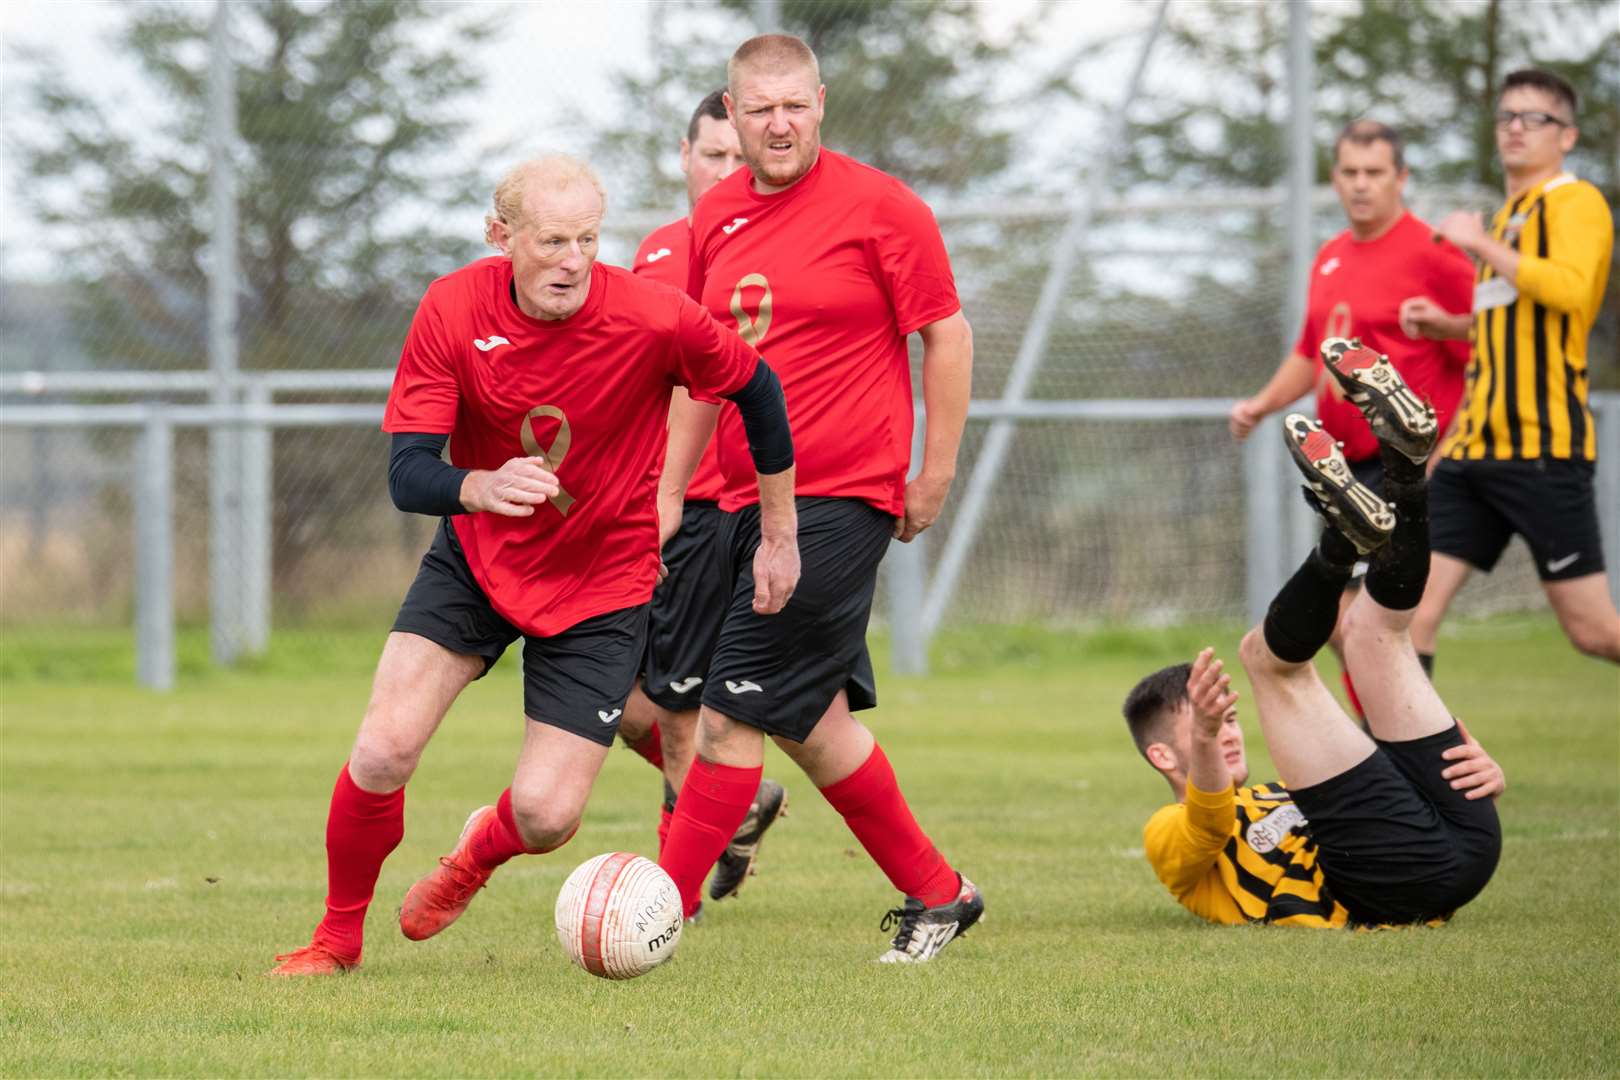 Colin Hendry has become a regular participant in the Keith charity football match. Picture: Daniel Forsyth..